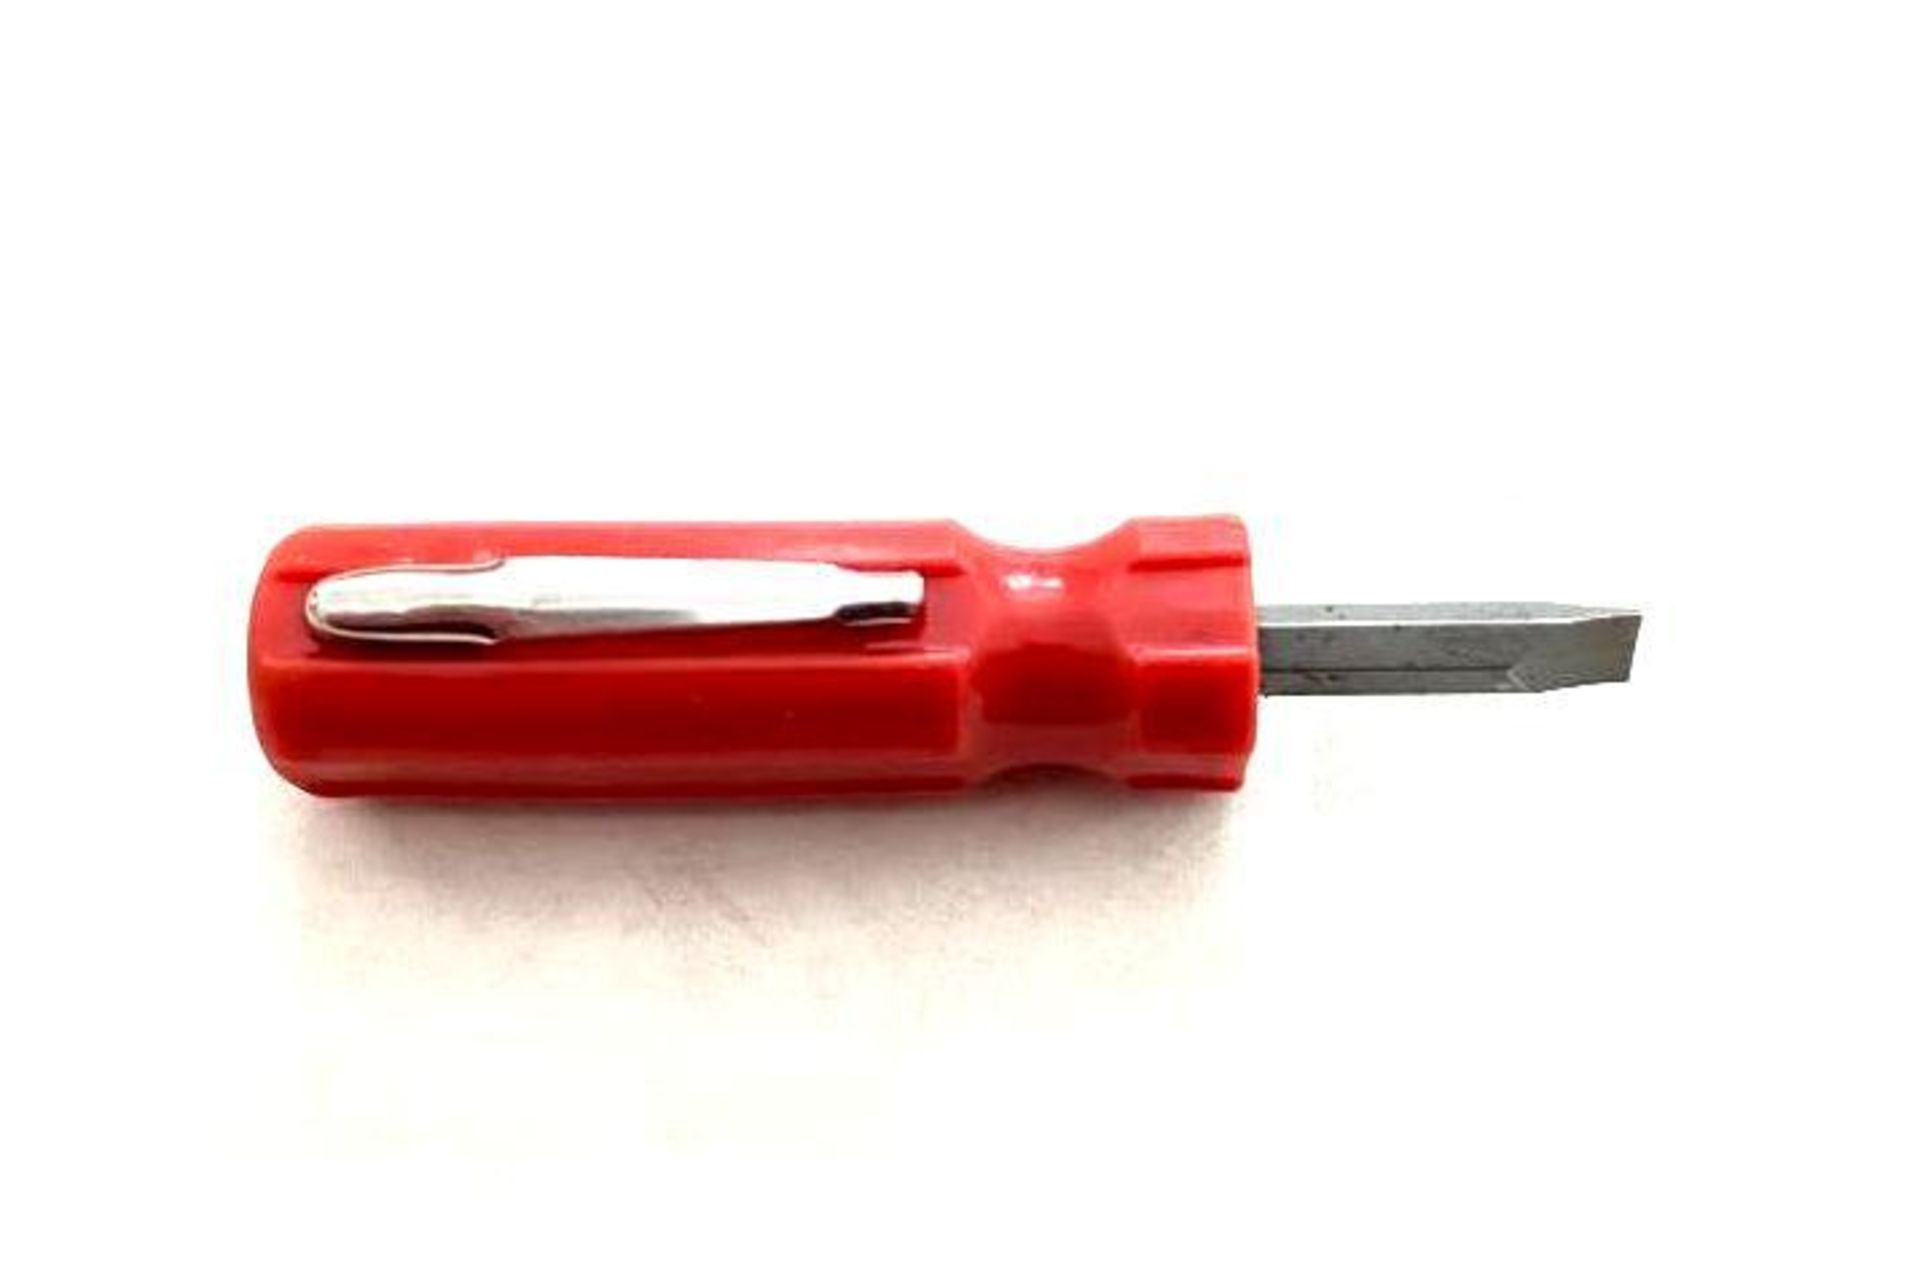 APPROX. 500CT POCKET FLAT HEAD SCREWDRIVERS WITH CLIP BRAND/MODEL EAZYPOWER ADDITIONAL INFO (2) 350C